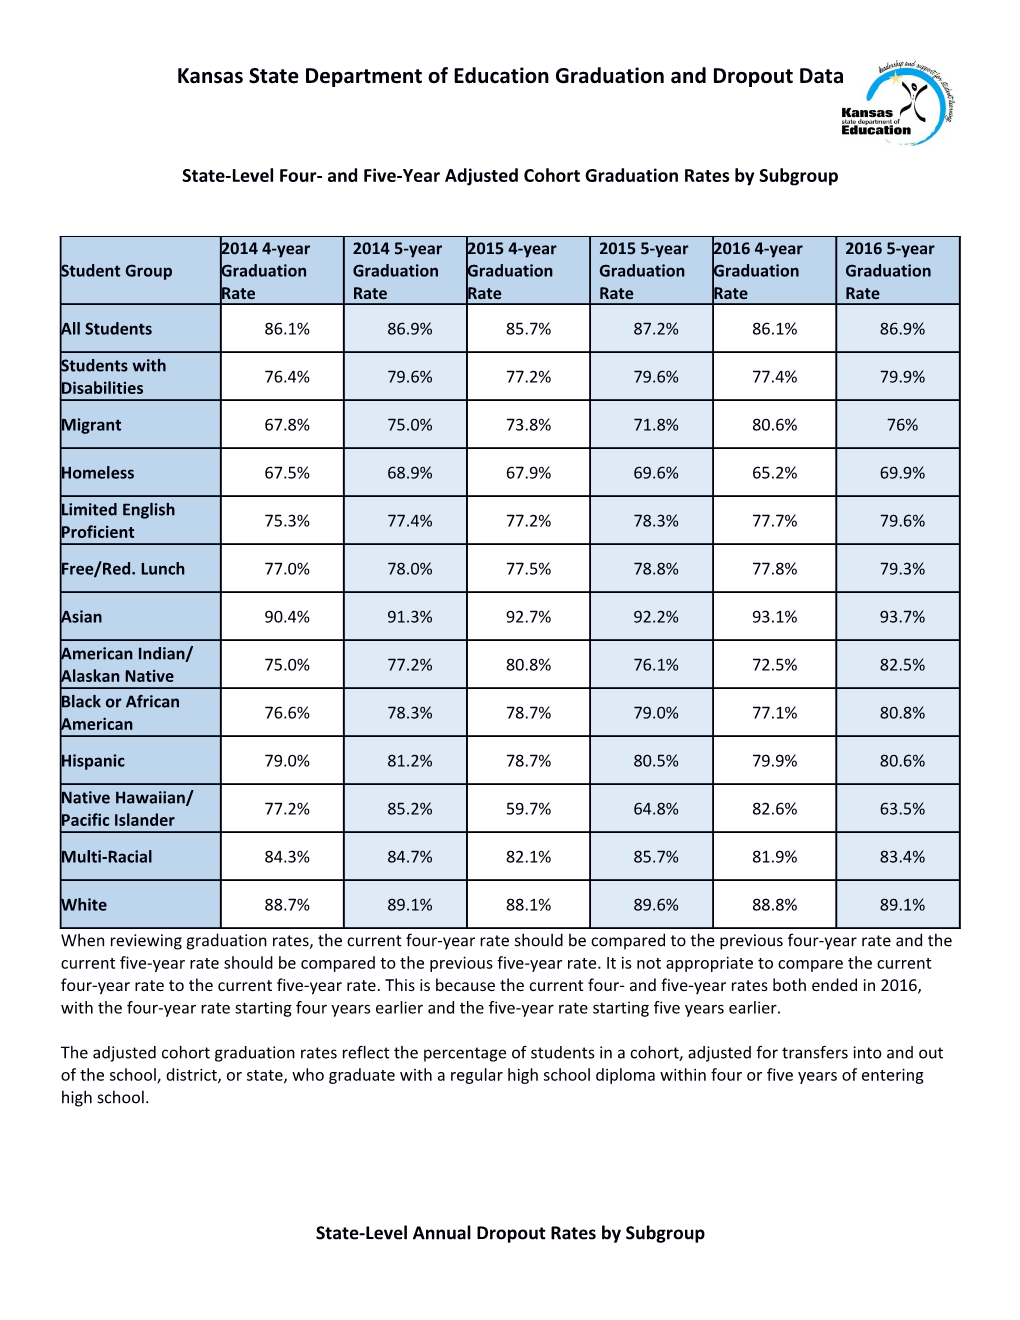 State-Level Four- and Five-Year Adjusted Cohort Graduation Rates by Subgroup